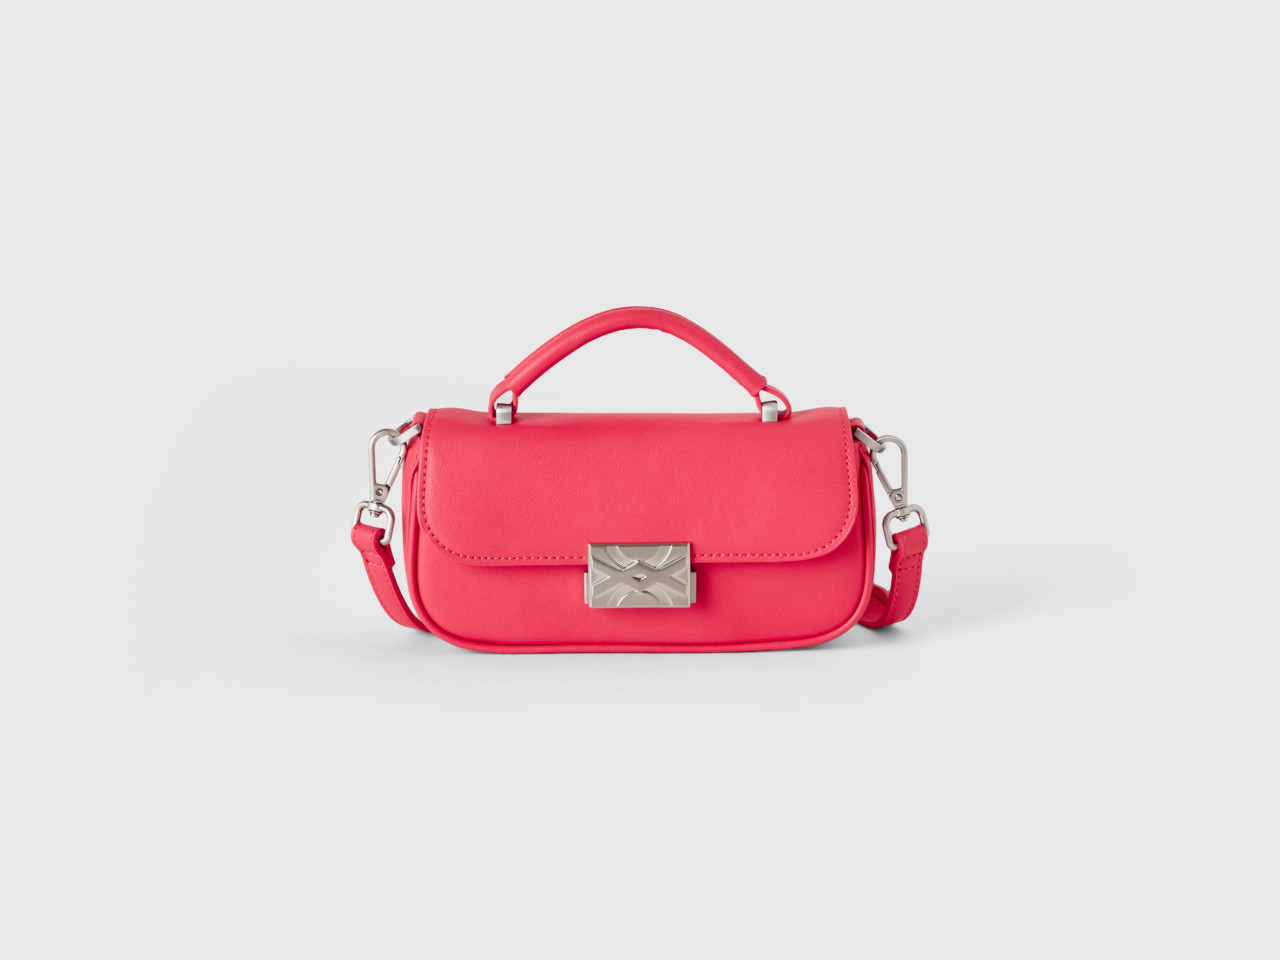 UNITED COLORS OF BENETTON Croc-Embossed Satchel Bag For Women (Red, FS)